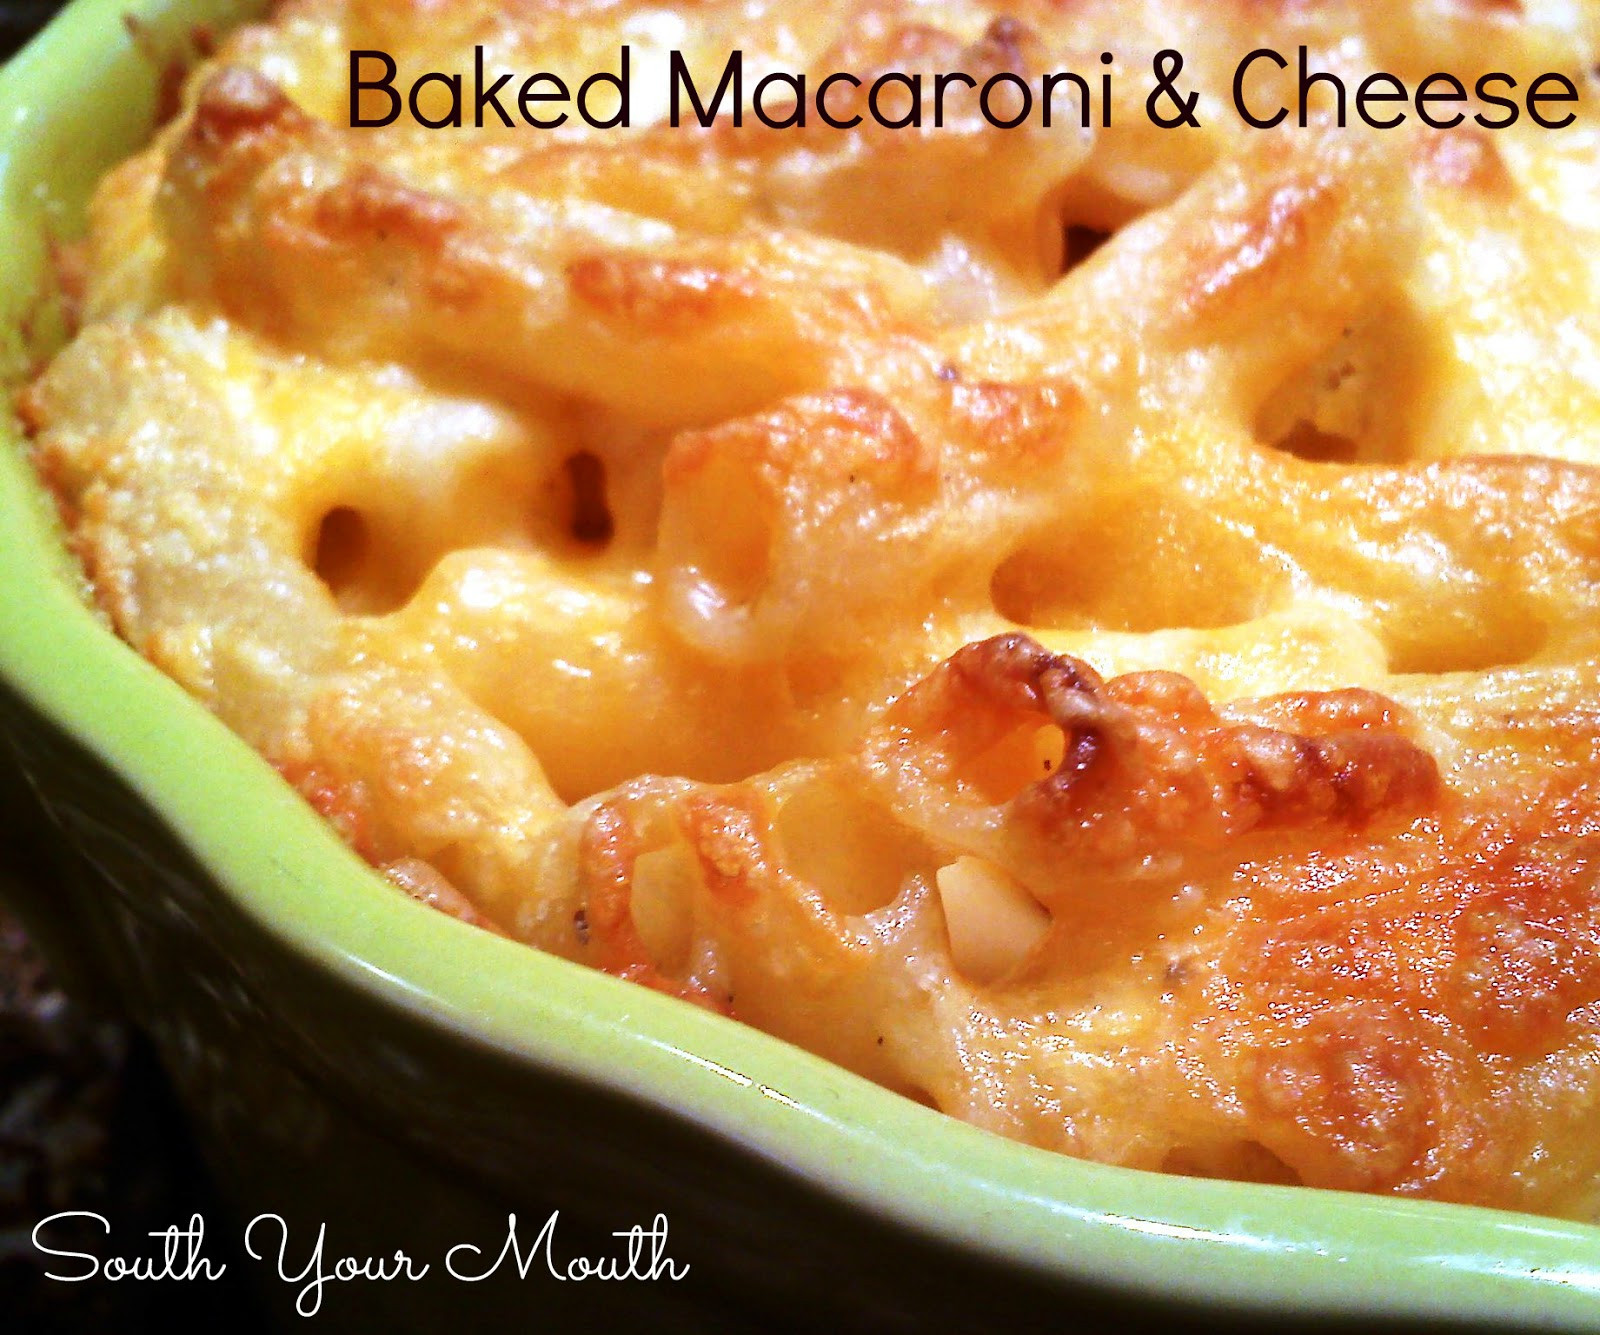 Baked Macaroni And Cheese Recipe With Eggs
 South Your Mouth Baked Macaroni & Cheese